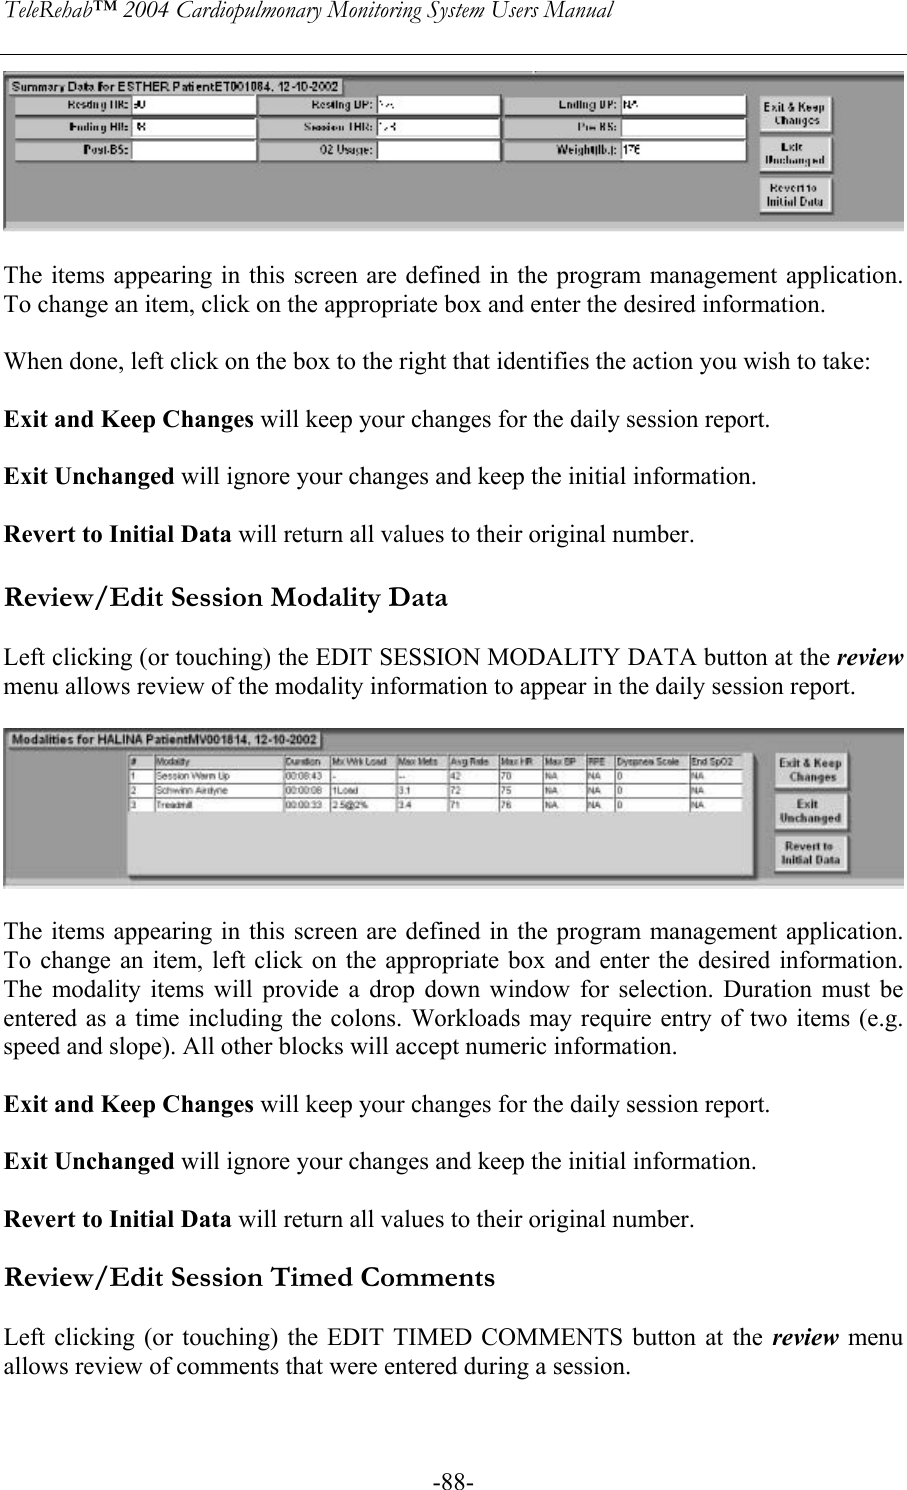 TeleRehab™ 2004 Cardiopulmonary Monitoring System Users Manual    -88-  The items appearing in this screen are defined in the program management application. To change an item, click on the appropriate box and enter the desired information.  When done, left click on the box to the right that identifies the action you wish to take:  Exit and Keep Changes will keep your changes for the daily session report.  Exit Unchanged will ignore your changes and keep the initial information.  Revert to Initial Data will return all values to their original number.  Review/Edit Session Modality Data  Left clicking (or touching) the EDIT SESSION MODALITY DATA button at the review menu allows review of the modality information to appear in the daily session report.    The items appearing in this screen are defined in the program management application. To change an item, left click on the appropriate box and enter the desired information. The modality items will provide a drop down window for selection. Duration must be entered as a time including the colons. Workloads may require entry of two items (e.g. speed and slope). All other blocks will accept numeric information.  Exit and Keep Changes will keep your changes for the daily session report.  Exit Unchanged will ignore your changes and keep the initial information.  Revert to Initial Data will return all values to their original number.  Review/Edit Session Timed Comments  Left clicking (or touching) the EDIT TIMED COMMENTS button at the review menu allows review of comments that were entered during a session.   